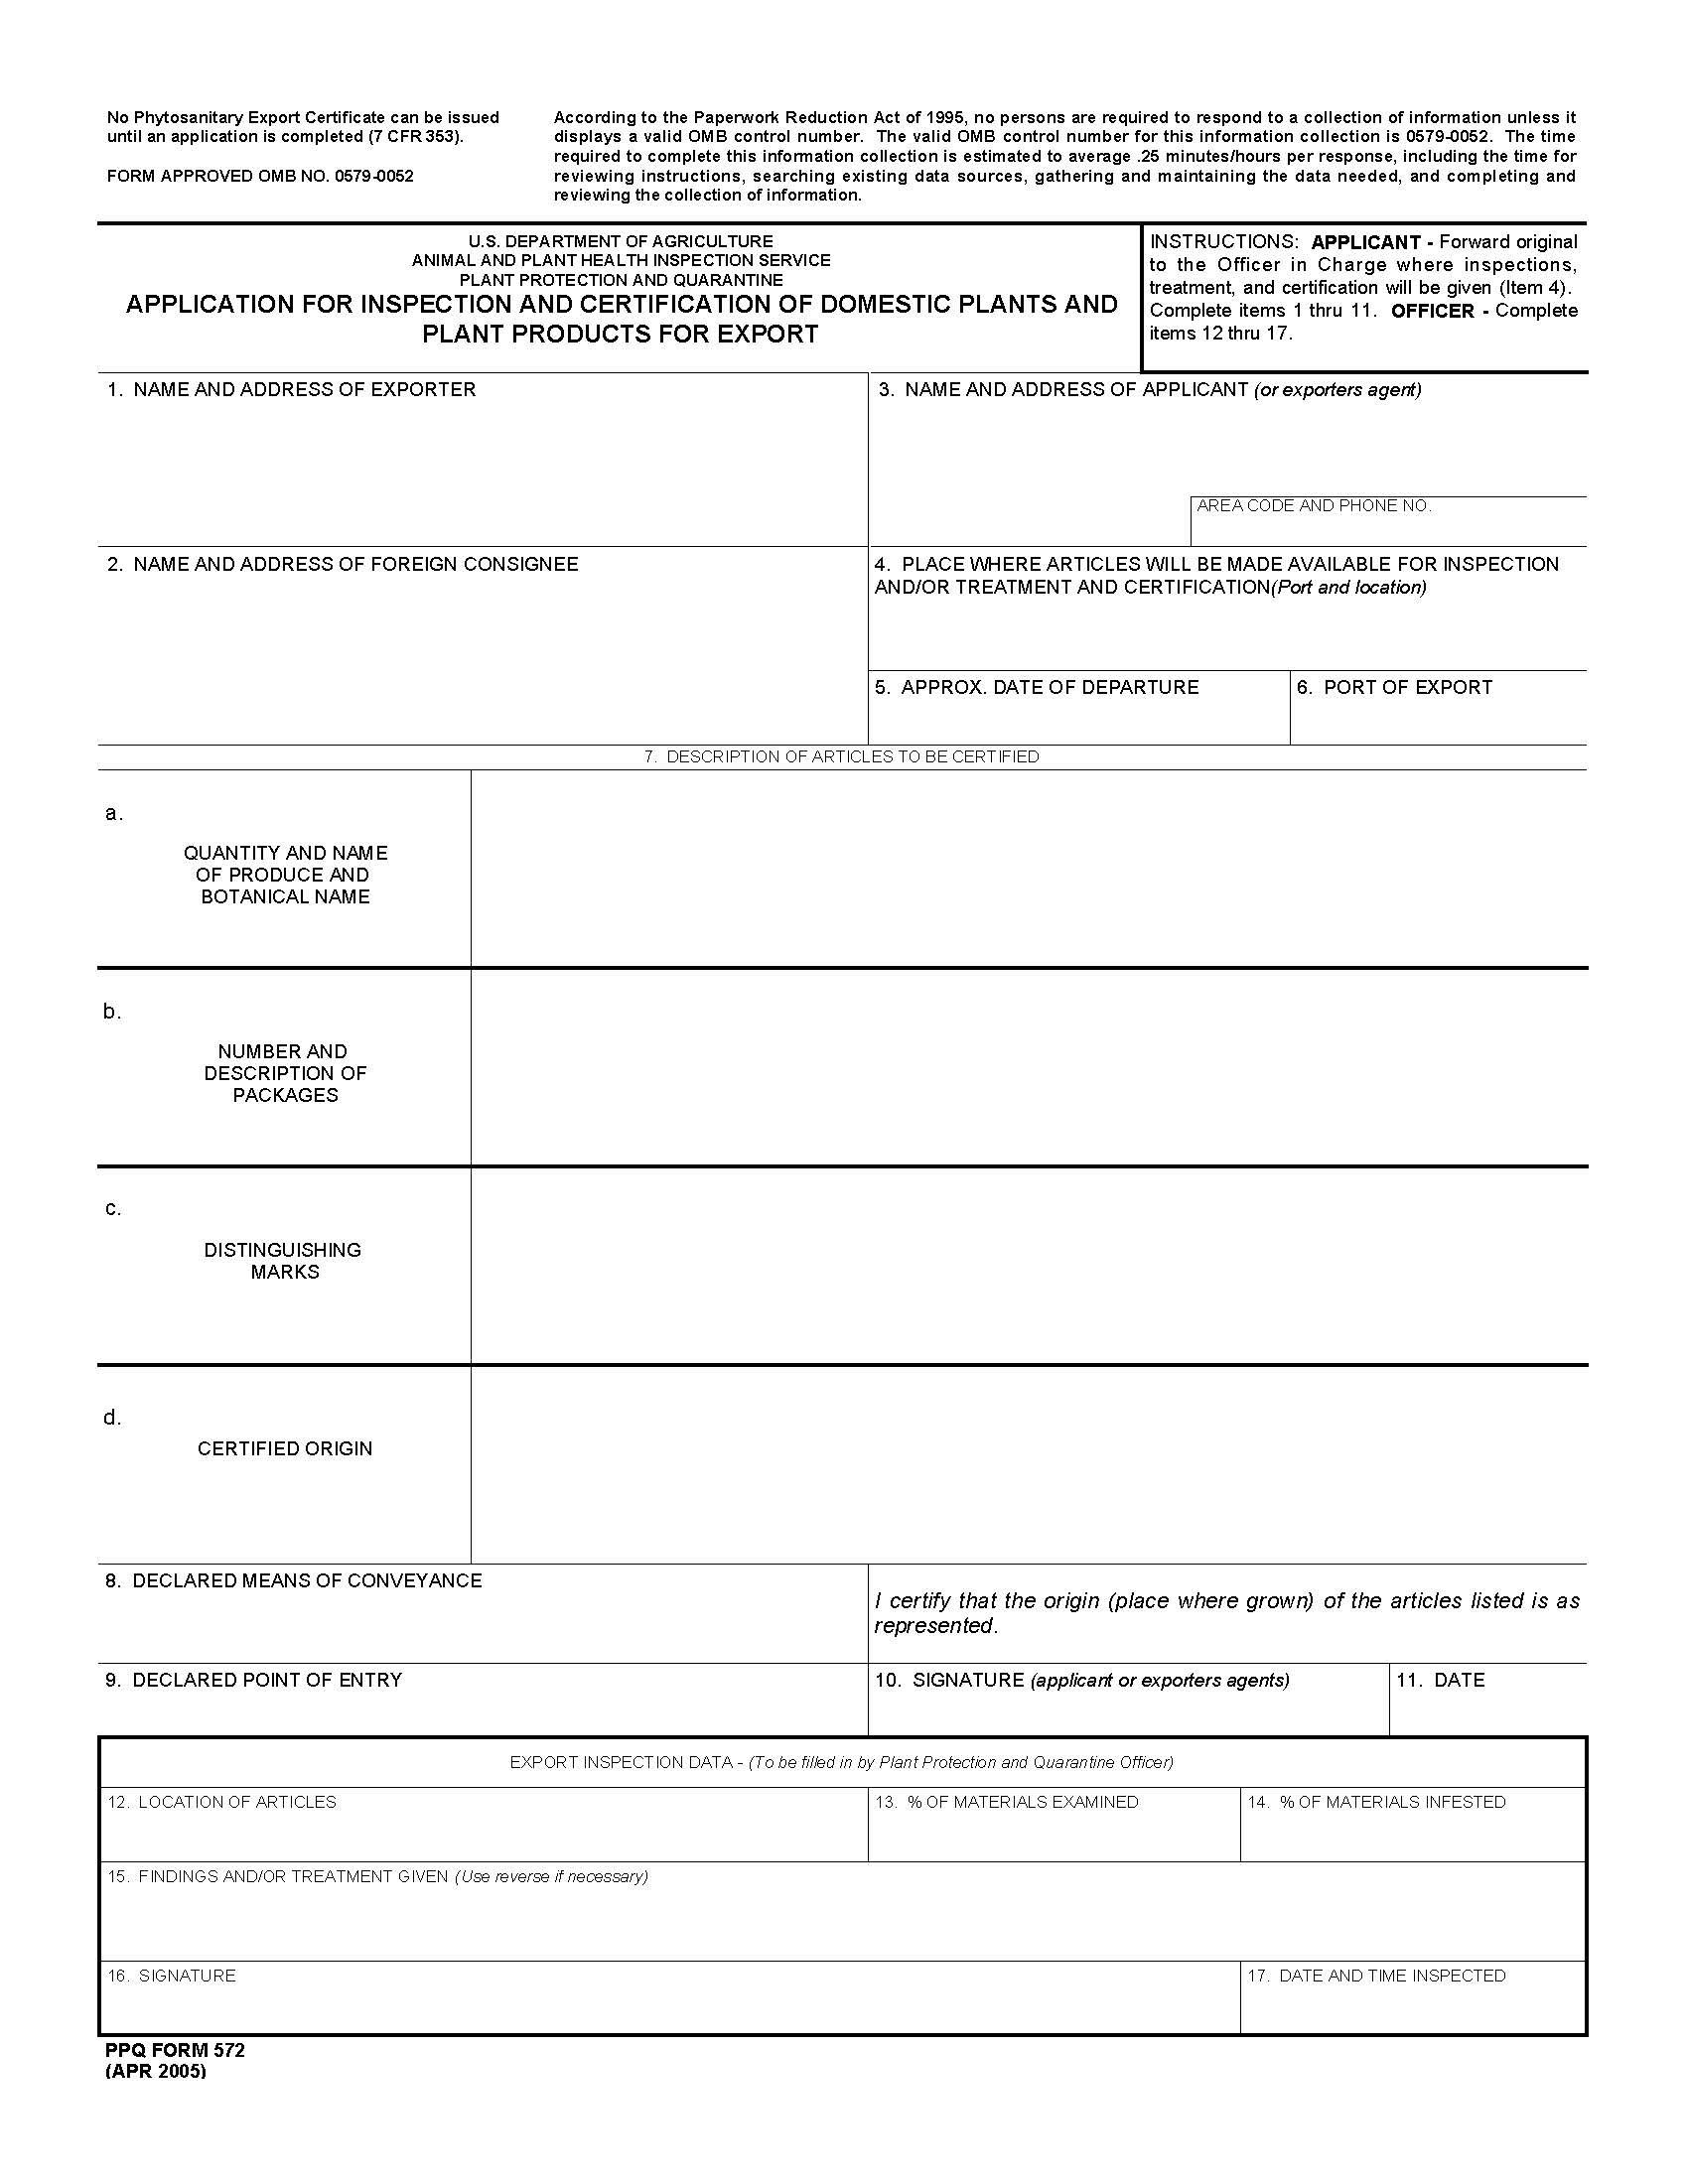 Phyto Application Form